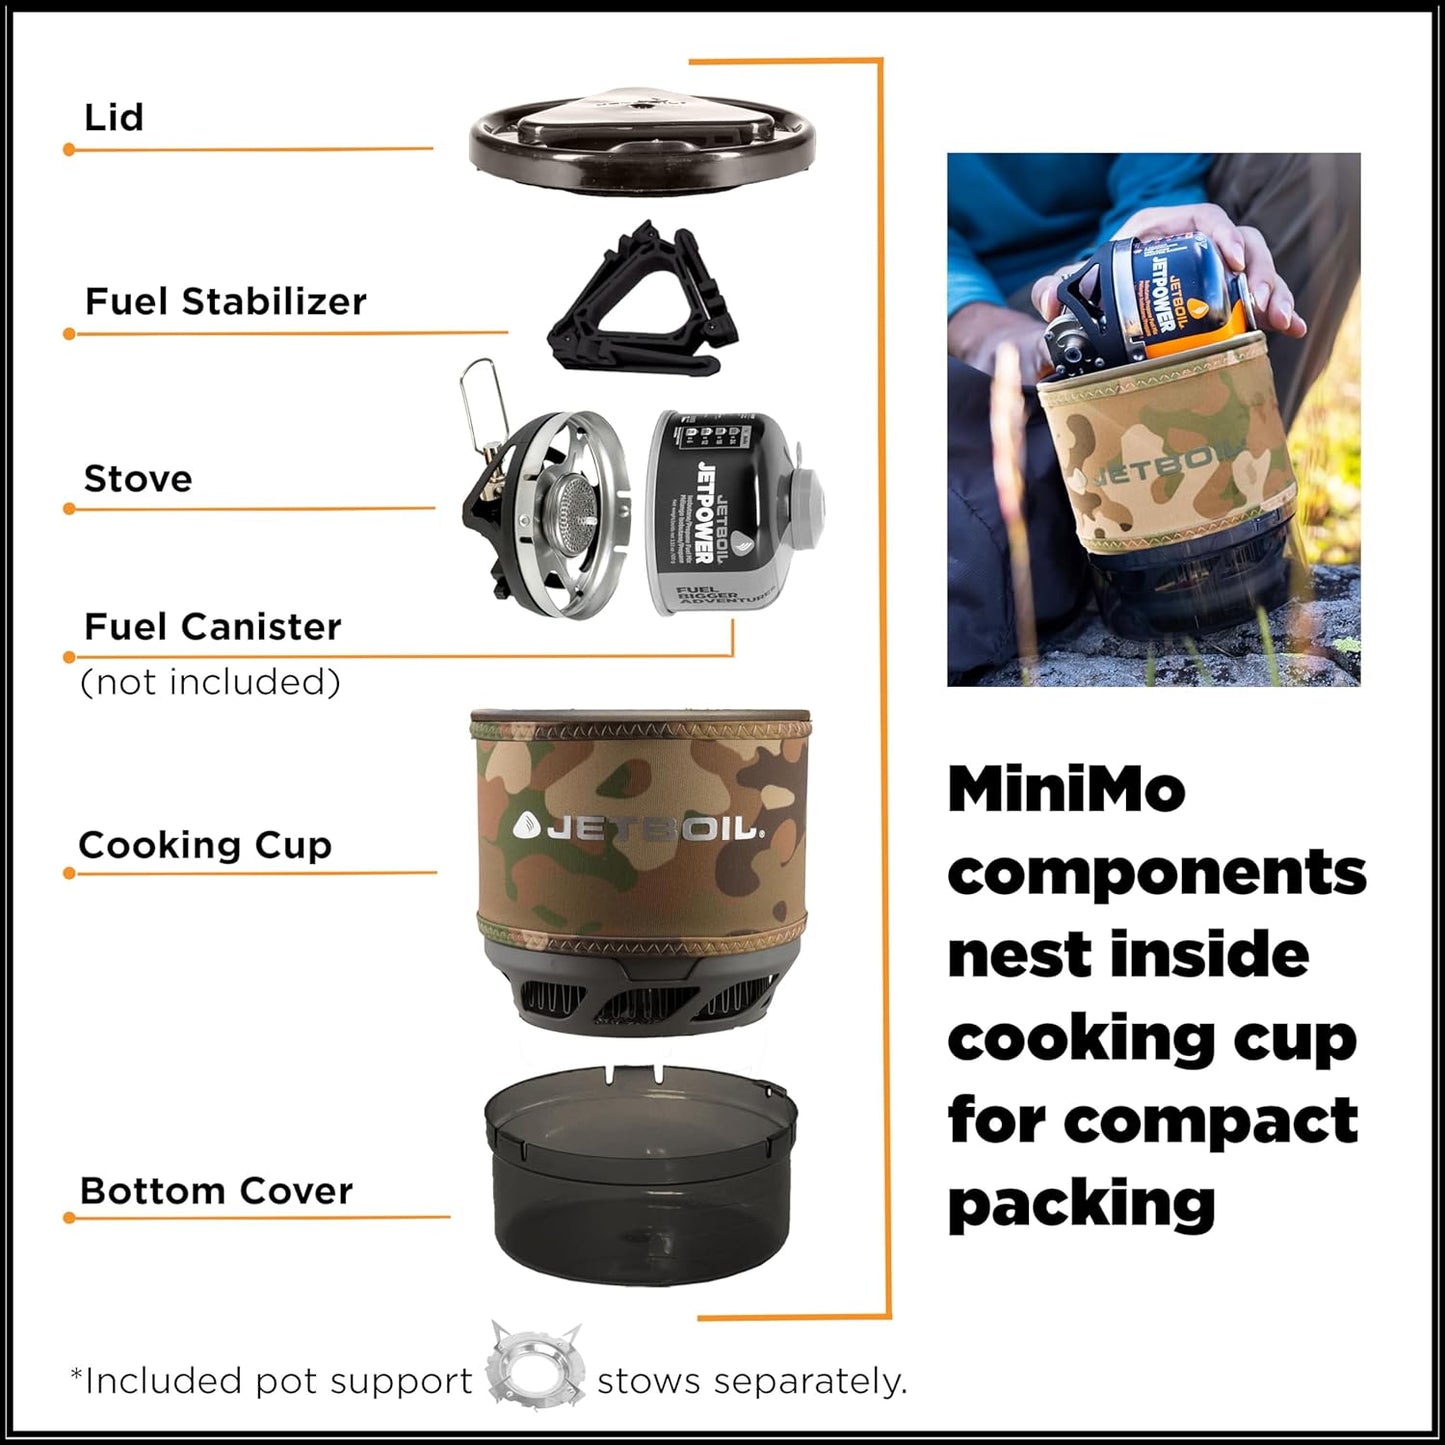 Jetboil MiniMo Camping and Backpacking Stove Cooking System with Adjustable Heat Control